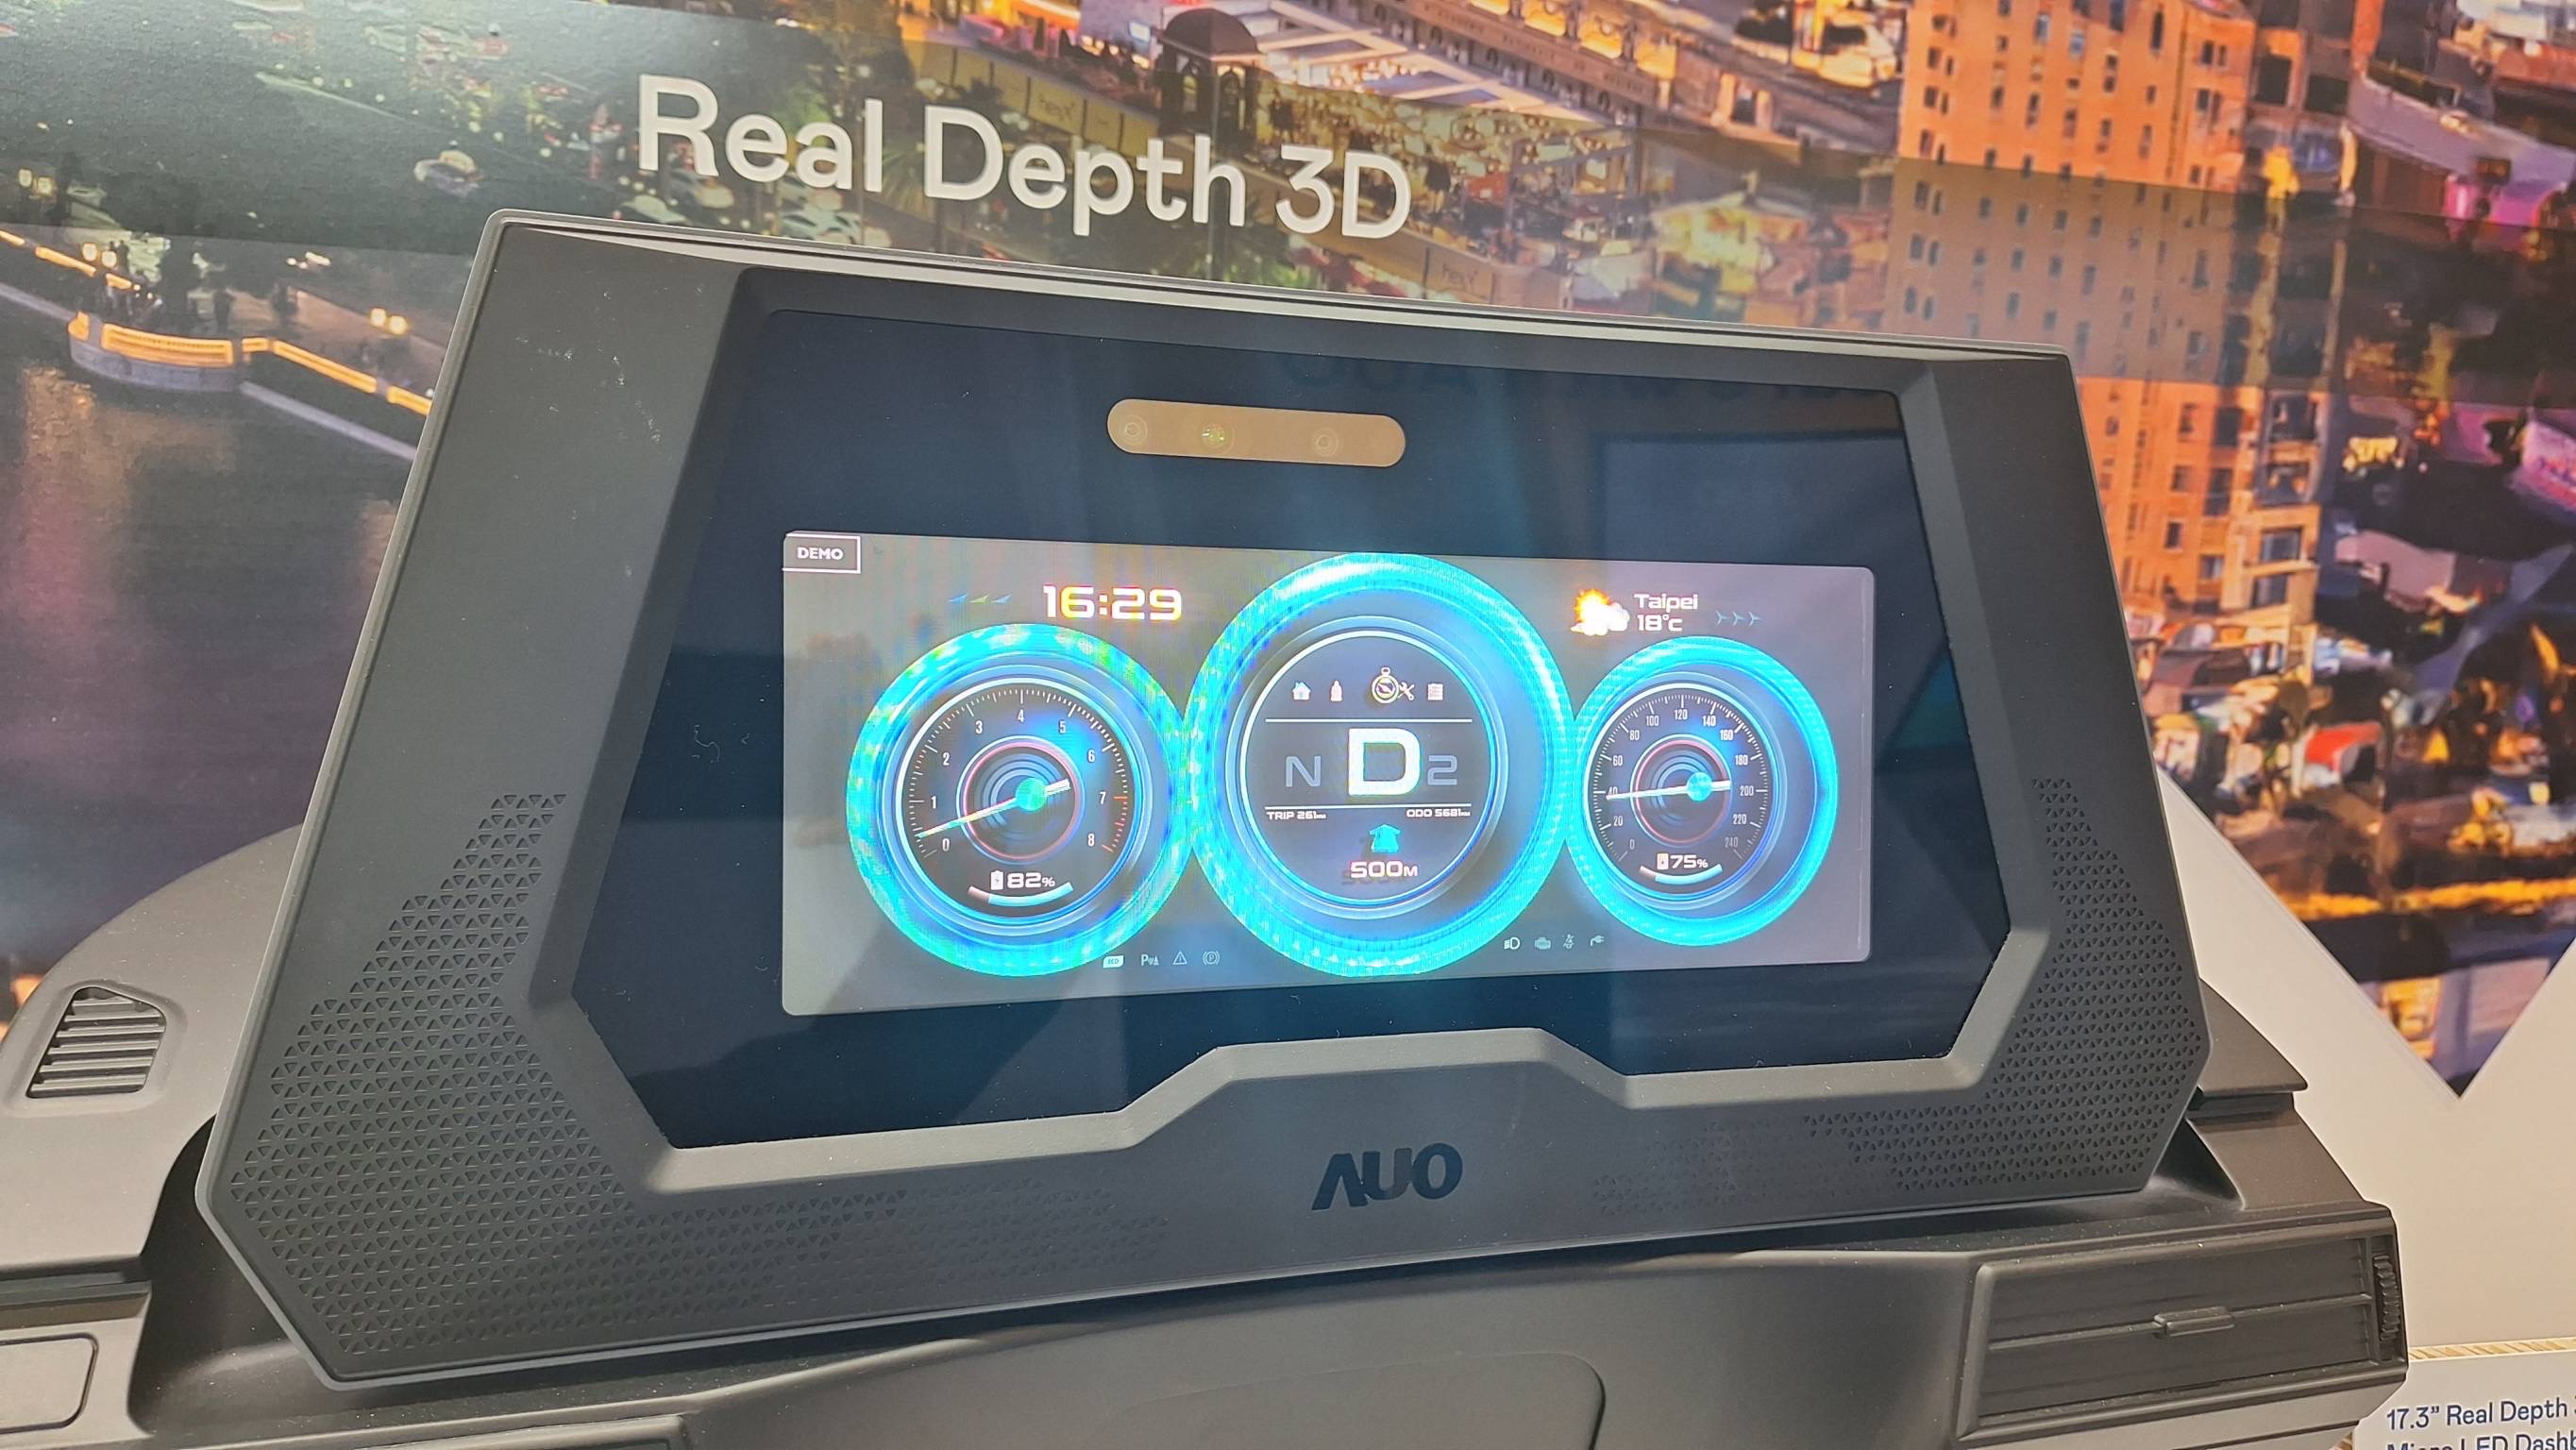 AUO’s The Real Depth 3D Micro LED Dashboard is a 17.3-inch display that seamlessly combines Micro LED and LCD technologies, creating a stunning 3D effect. It also features the Driver Monitoring System (DMS) for added safety.